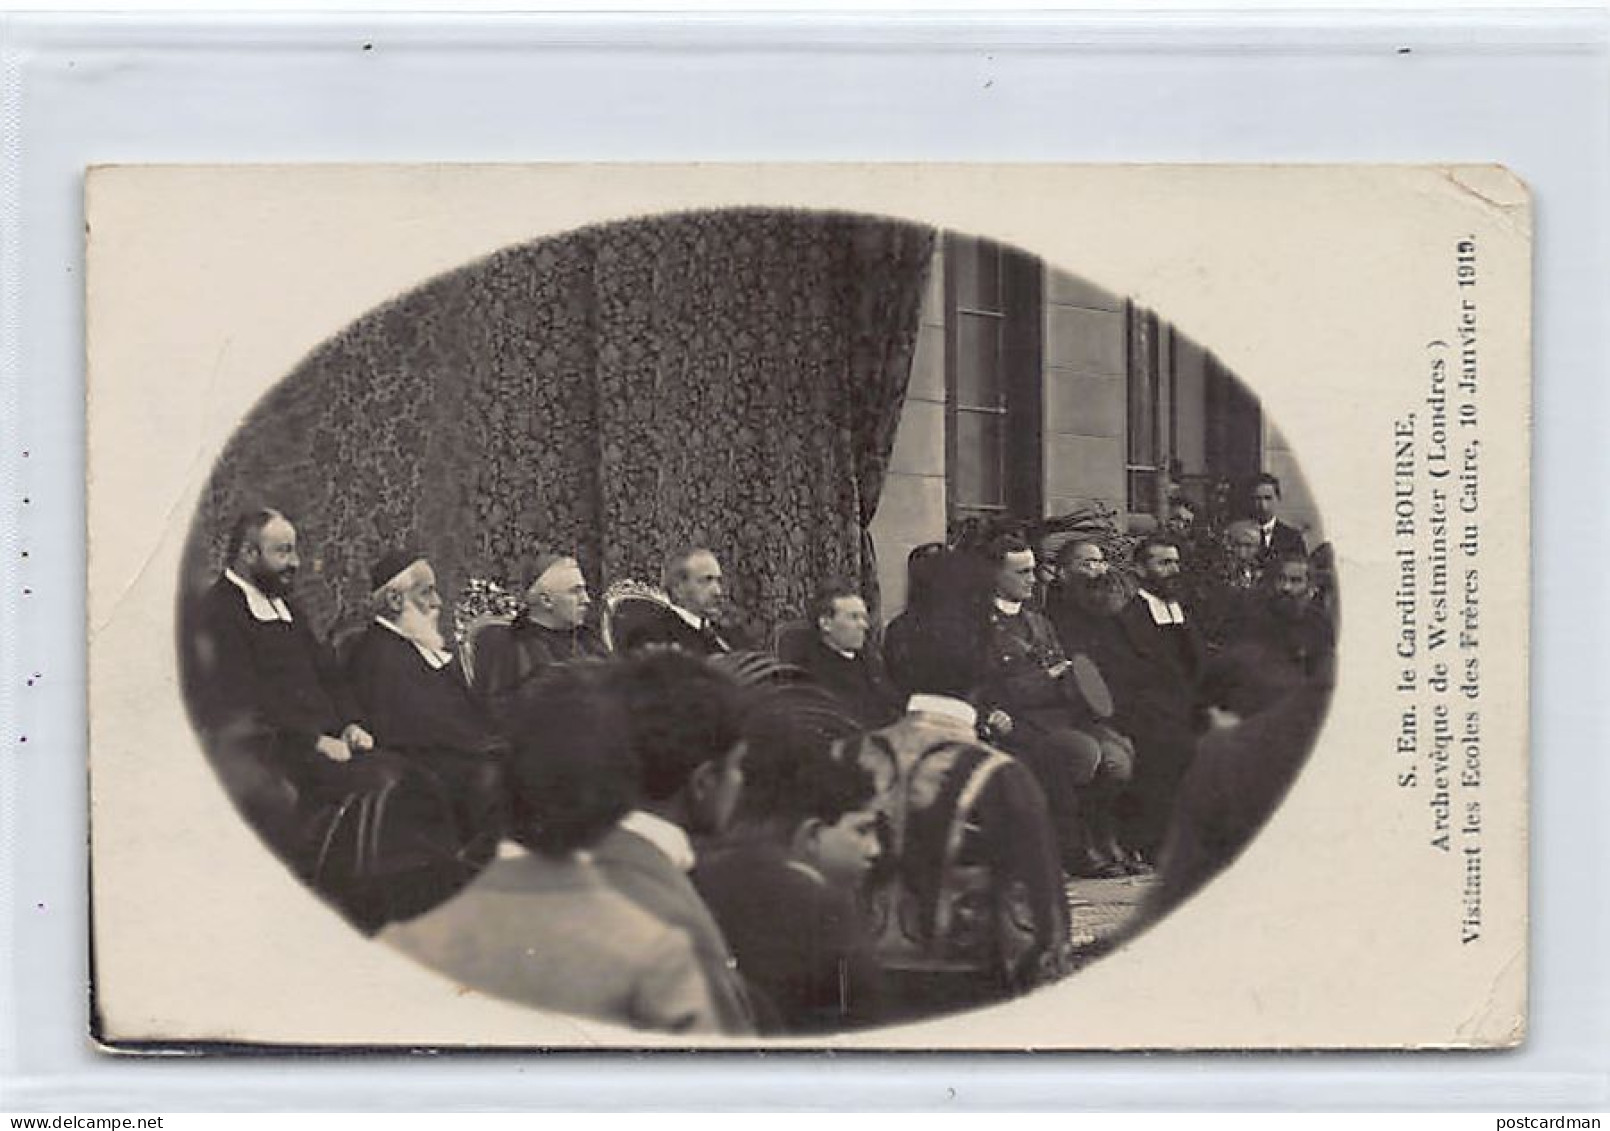 Egypt - CAIRO - H.E. Cardinal Bourne, Archbishop Of Westminster, Visiting The Ecole Des Frères, 10 January 1919 - REAL P - Kairo